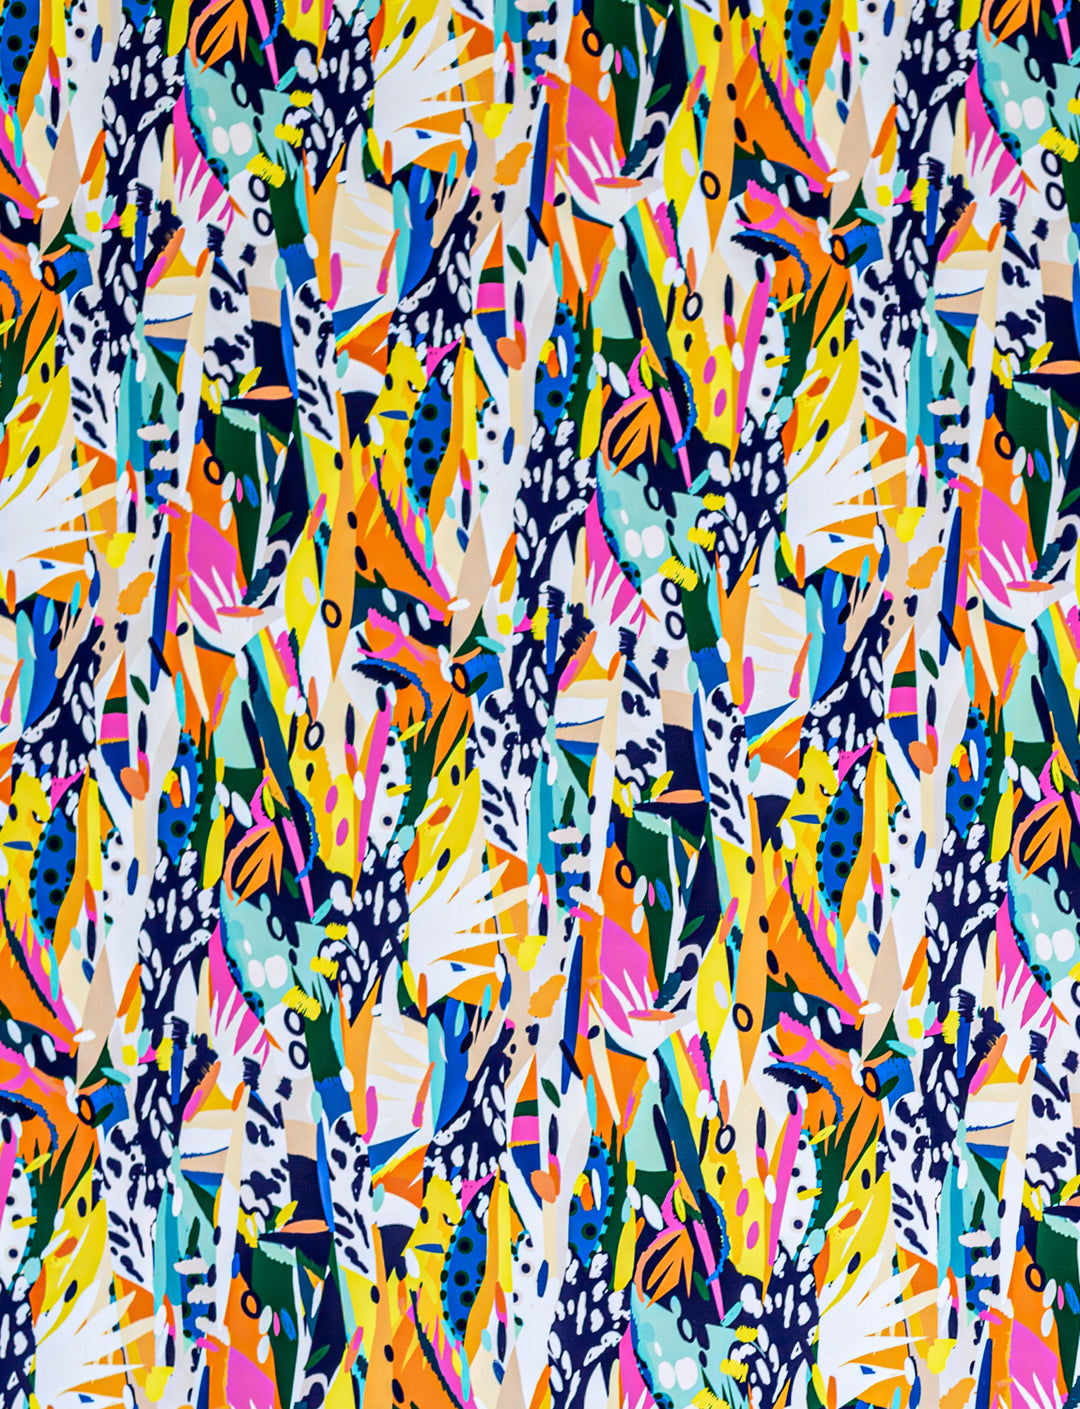 Wilderness print fabric with muti coloured shapes and textures.